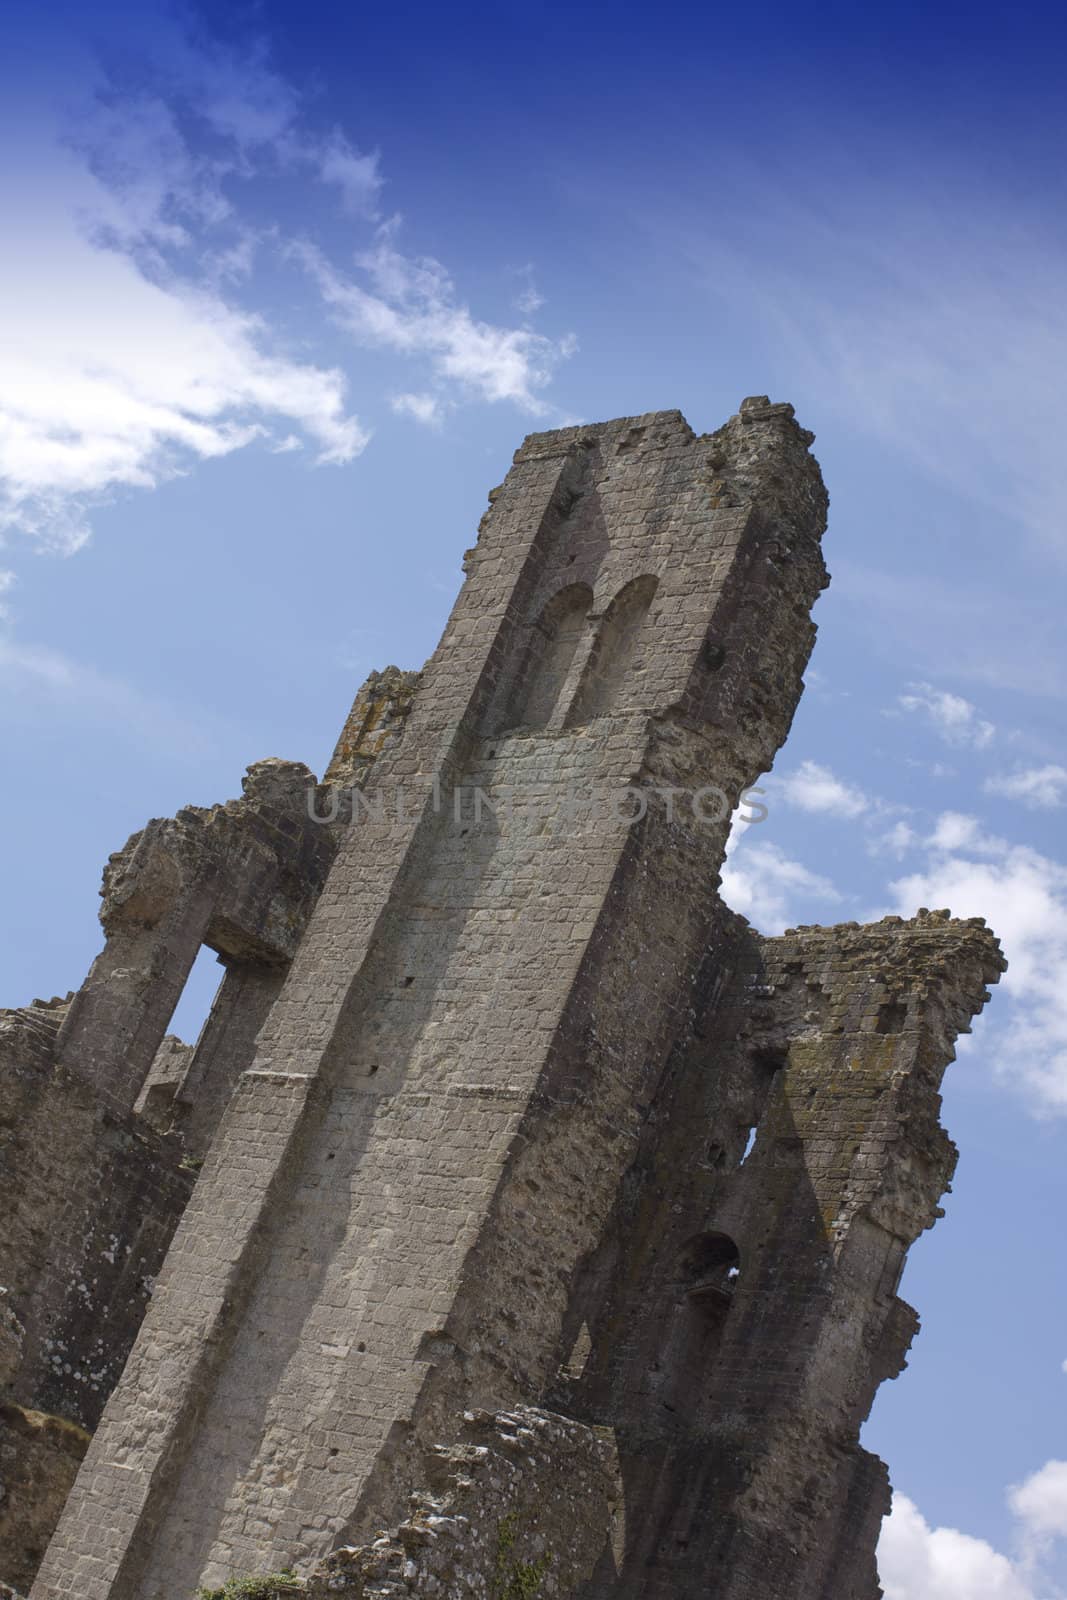 The 1000 year old crumbling ruins of Corfe castle rising above the Isle of Purbeck in Dorset,, England. Built in Roman times the castle was once a controlling gateway through the Purbeck Hills.